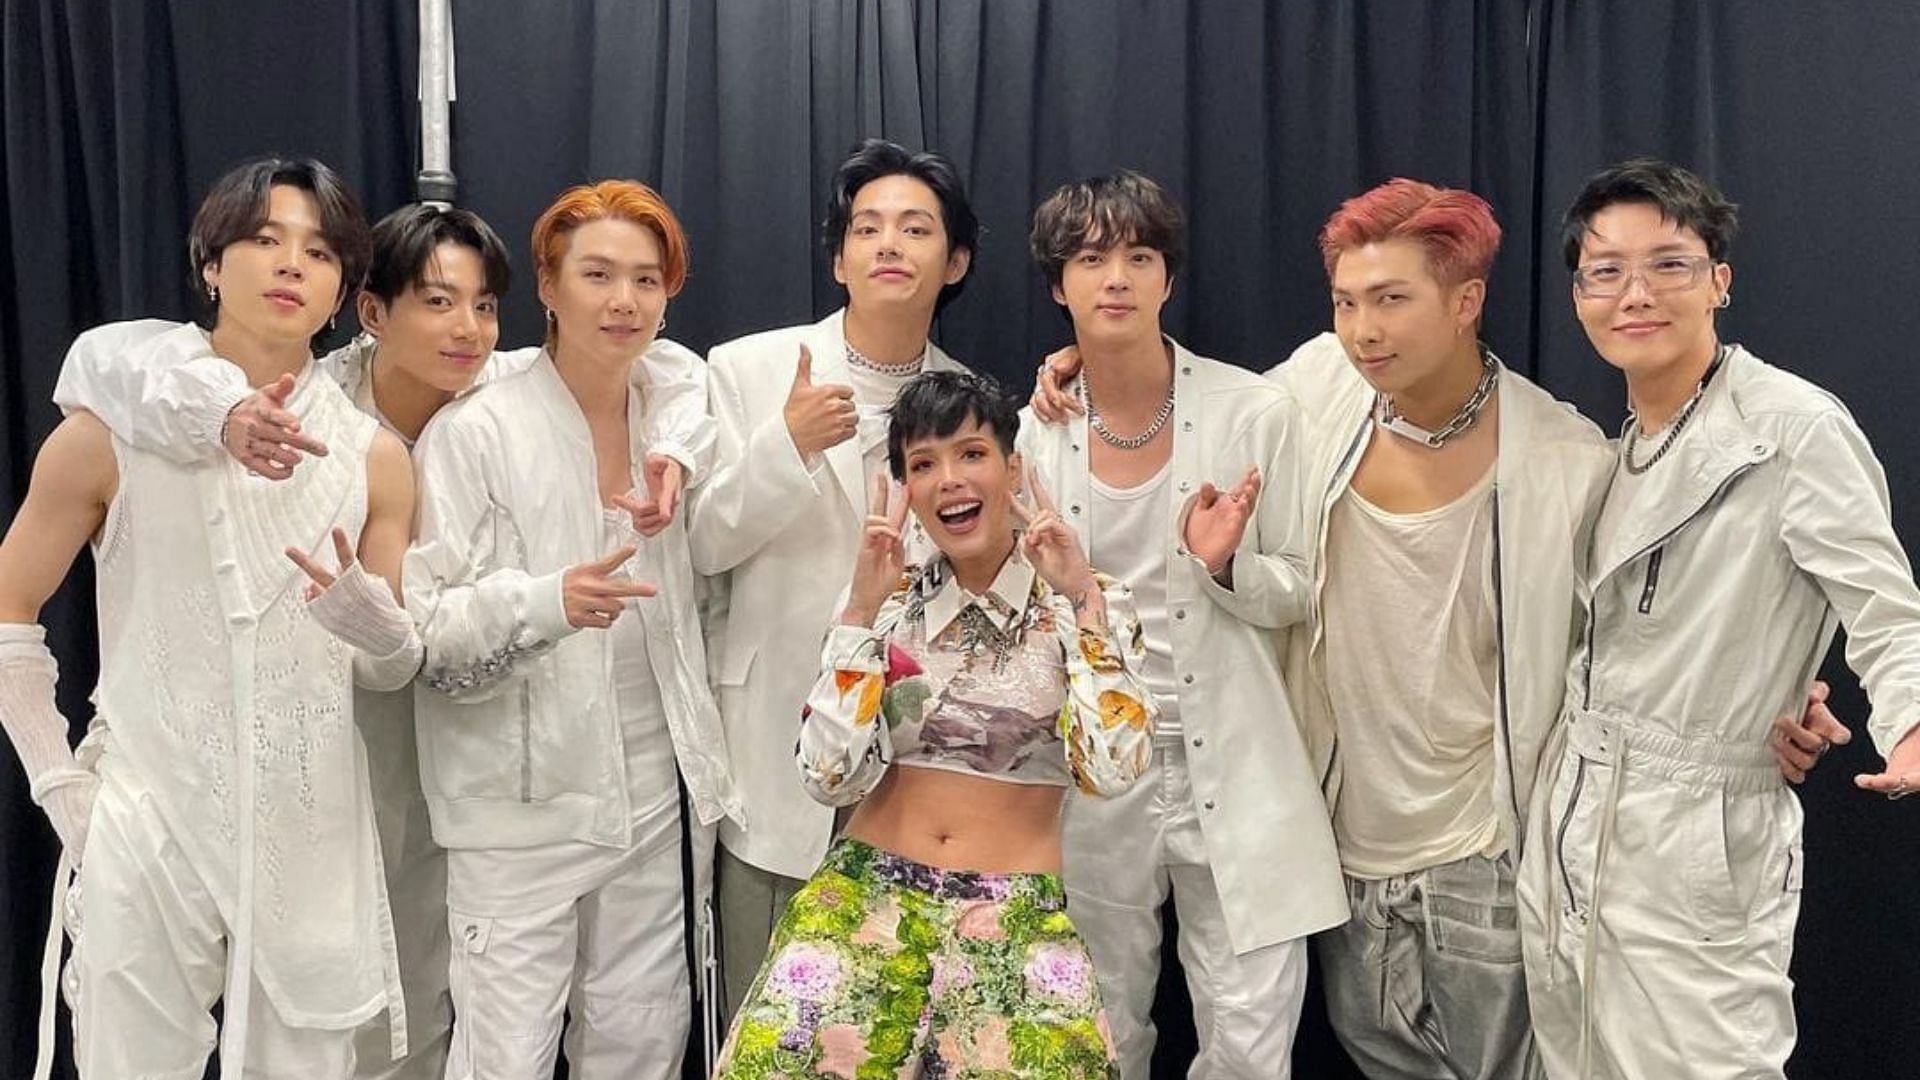 A still of BTS members with Halsey (Image via bts_bighit/Twitter)